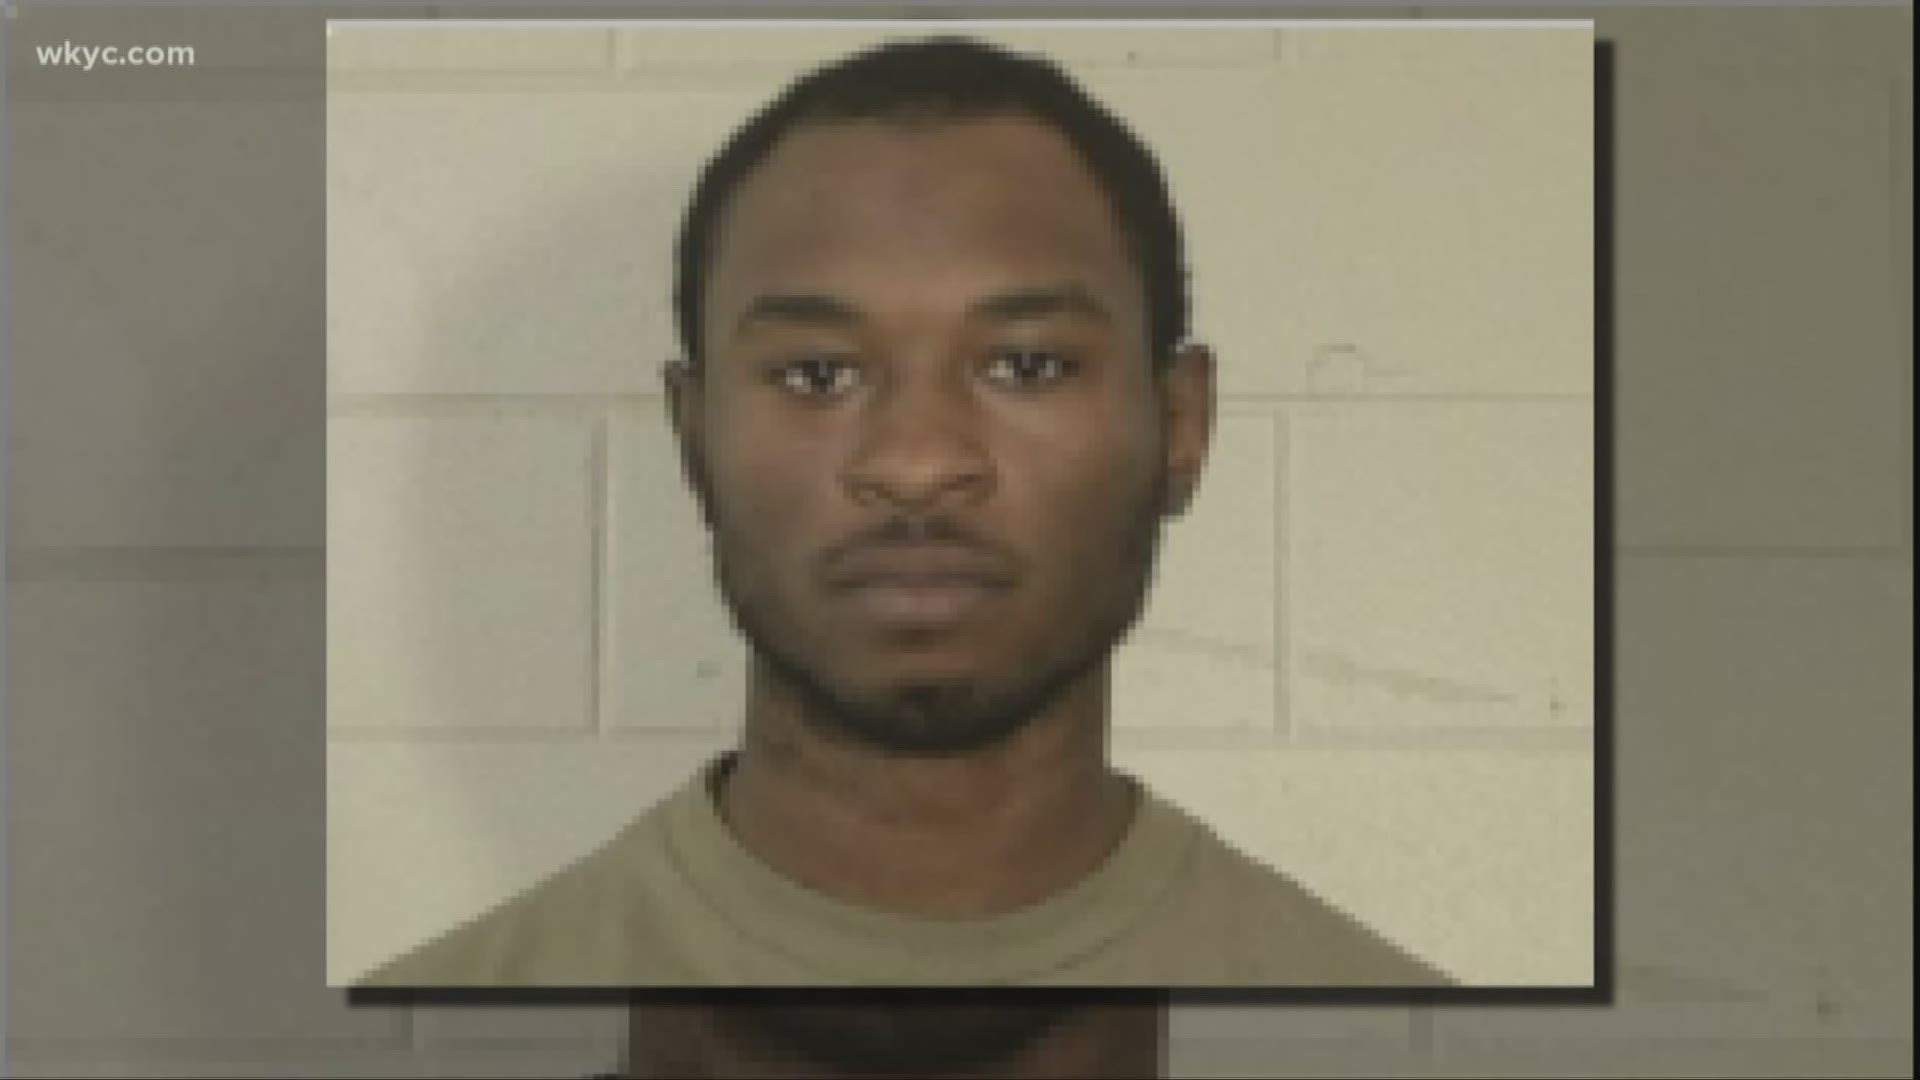 Tevin Biles-Thomas is currently at the Liberty County Jail in Georgia. It is unknown when he will be extradited to Northeast Ohio.